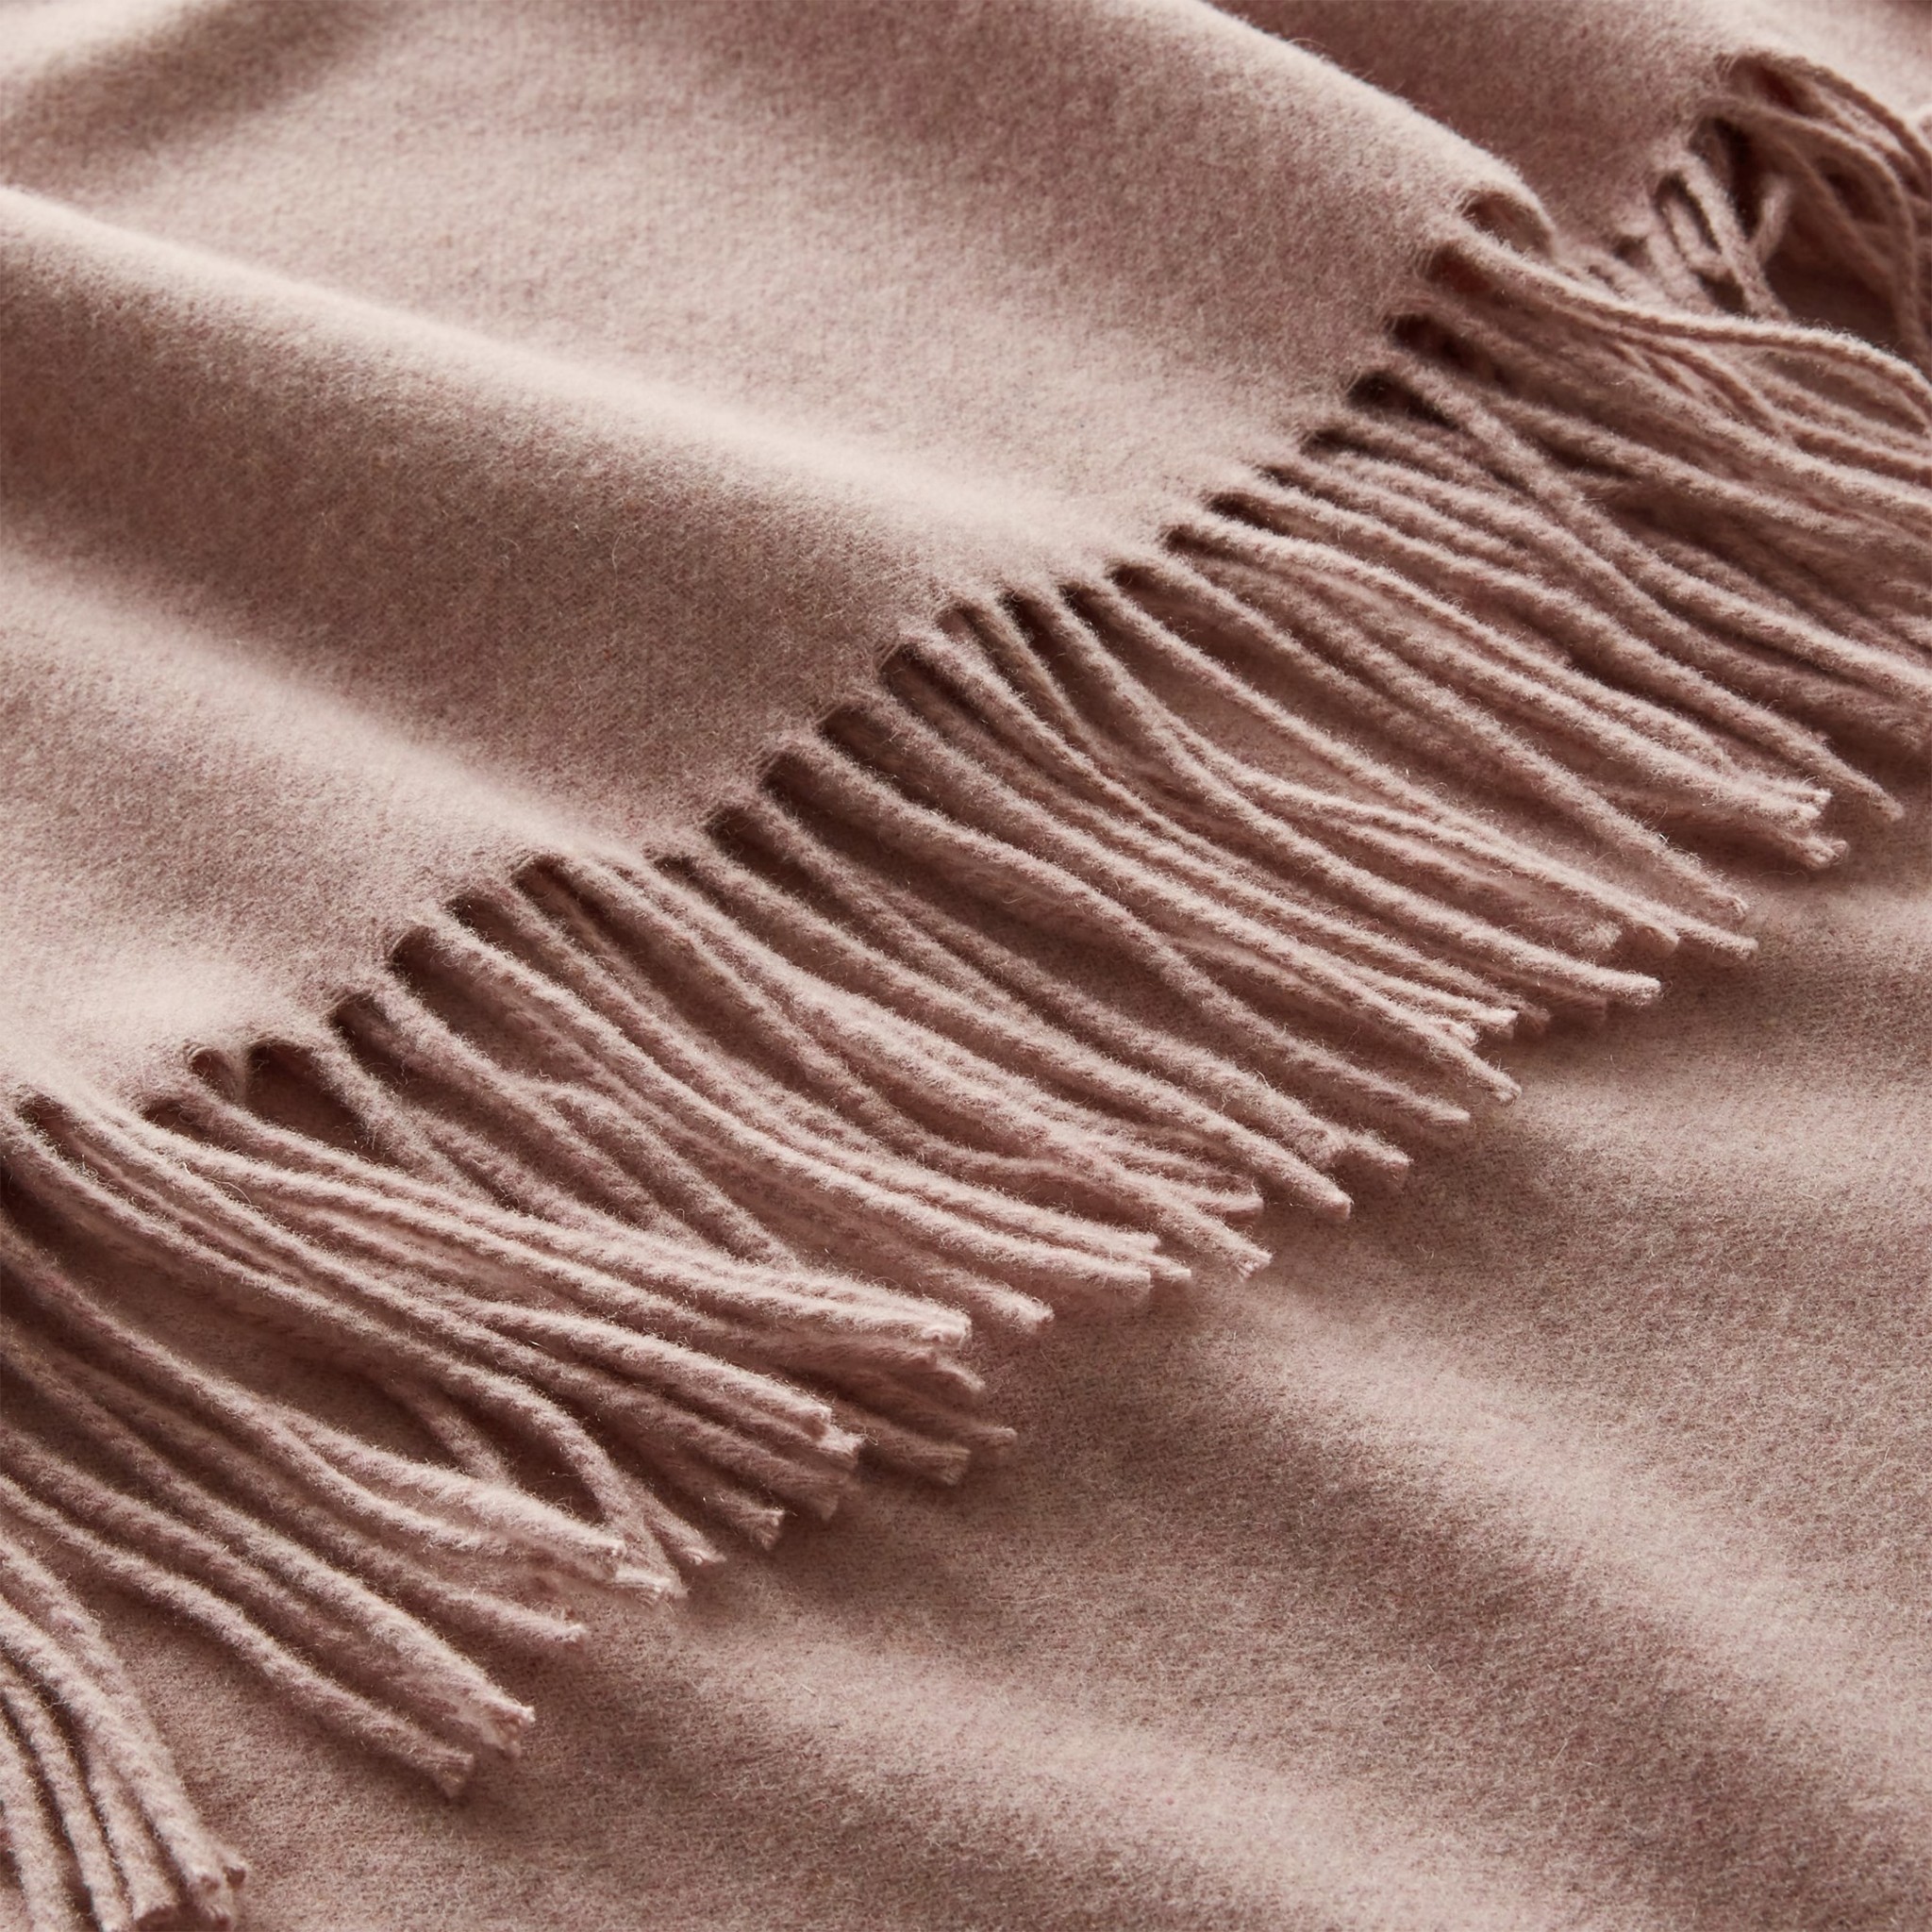 The image of an Williams Sonoma European Solid Cashmere Throw product